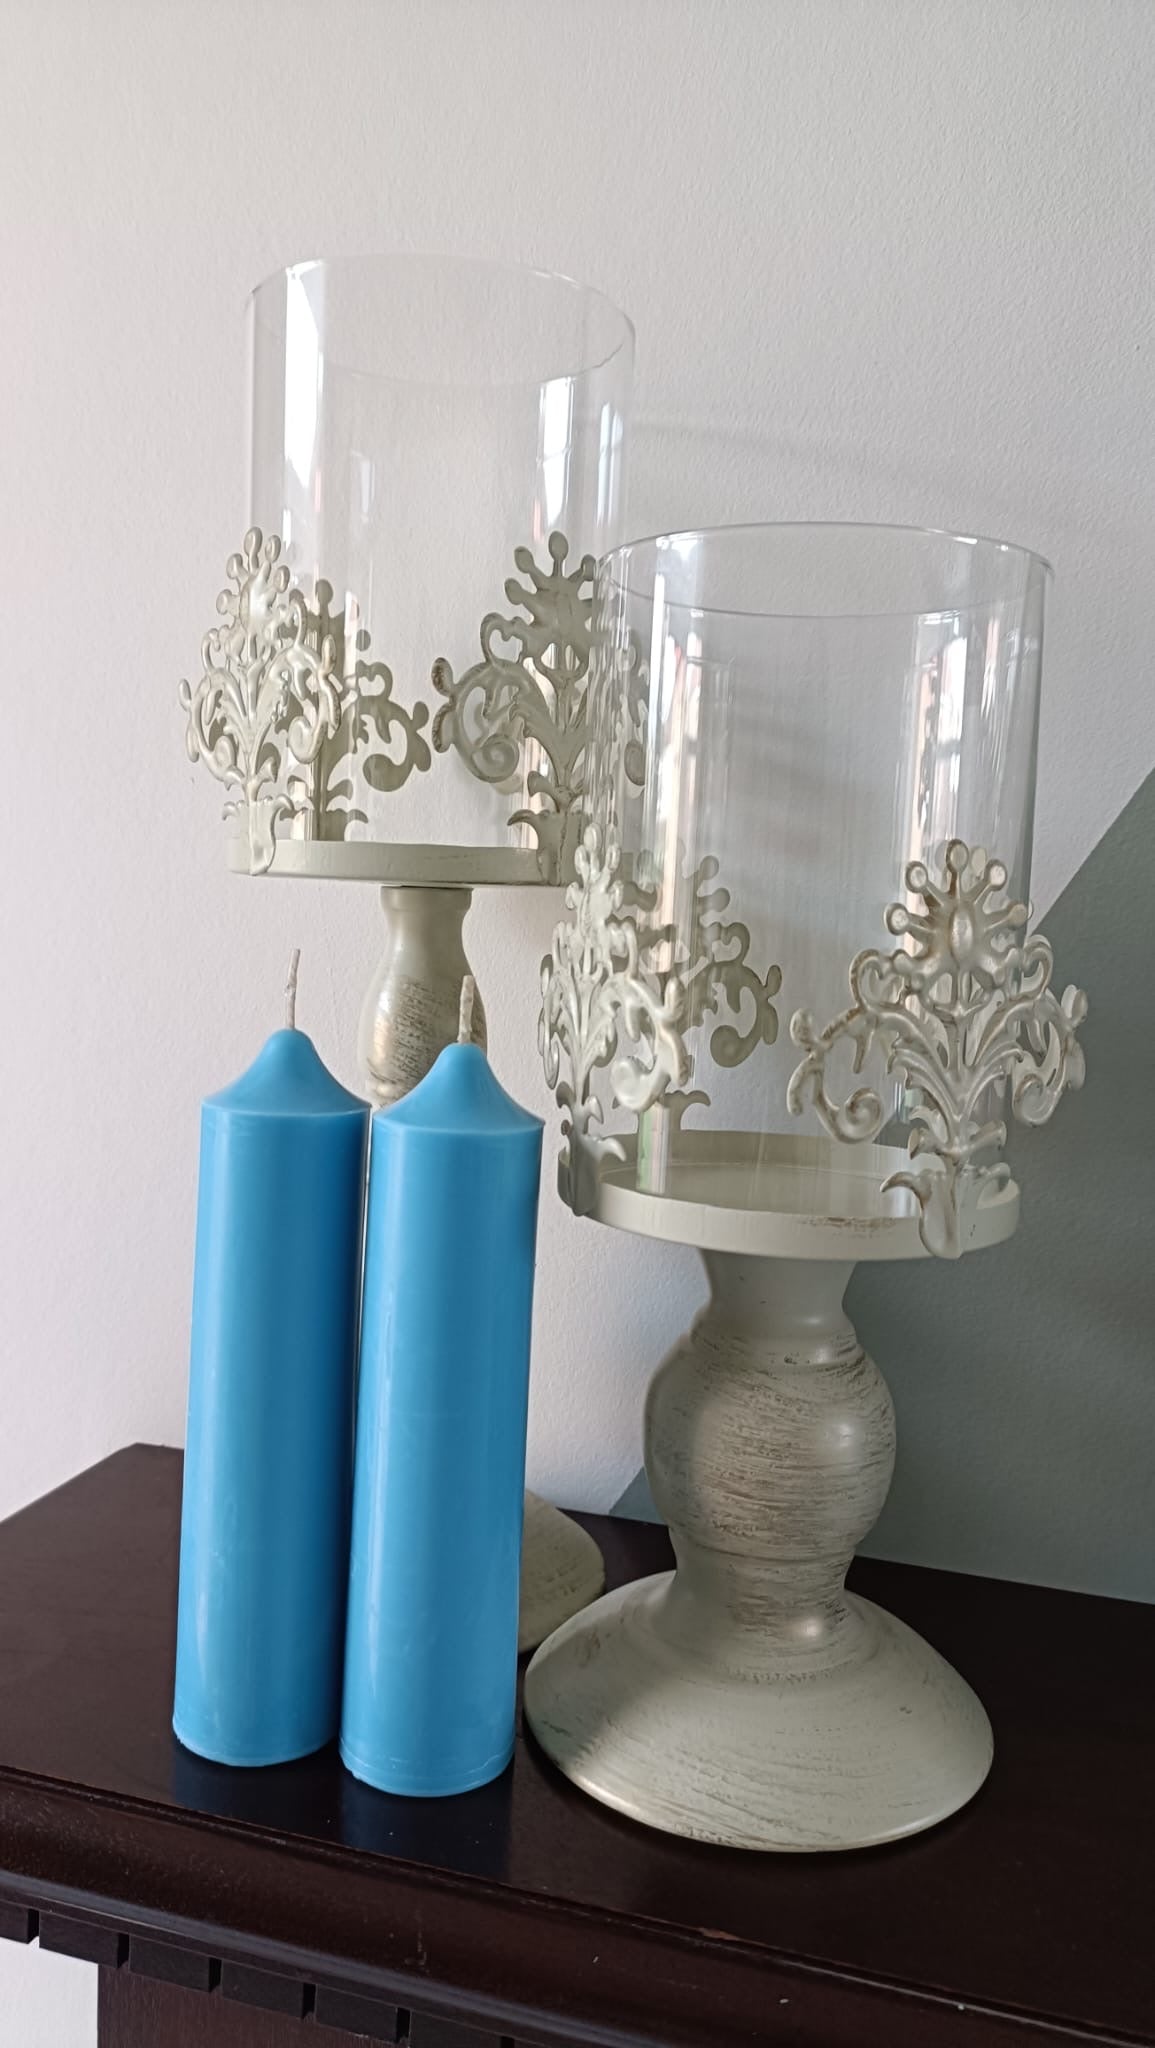 Blue Soy Wax Pillar Candles - Unscented, Set of 2 (Various Sizes)